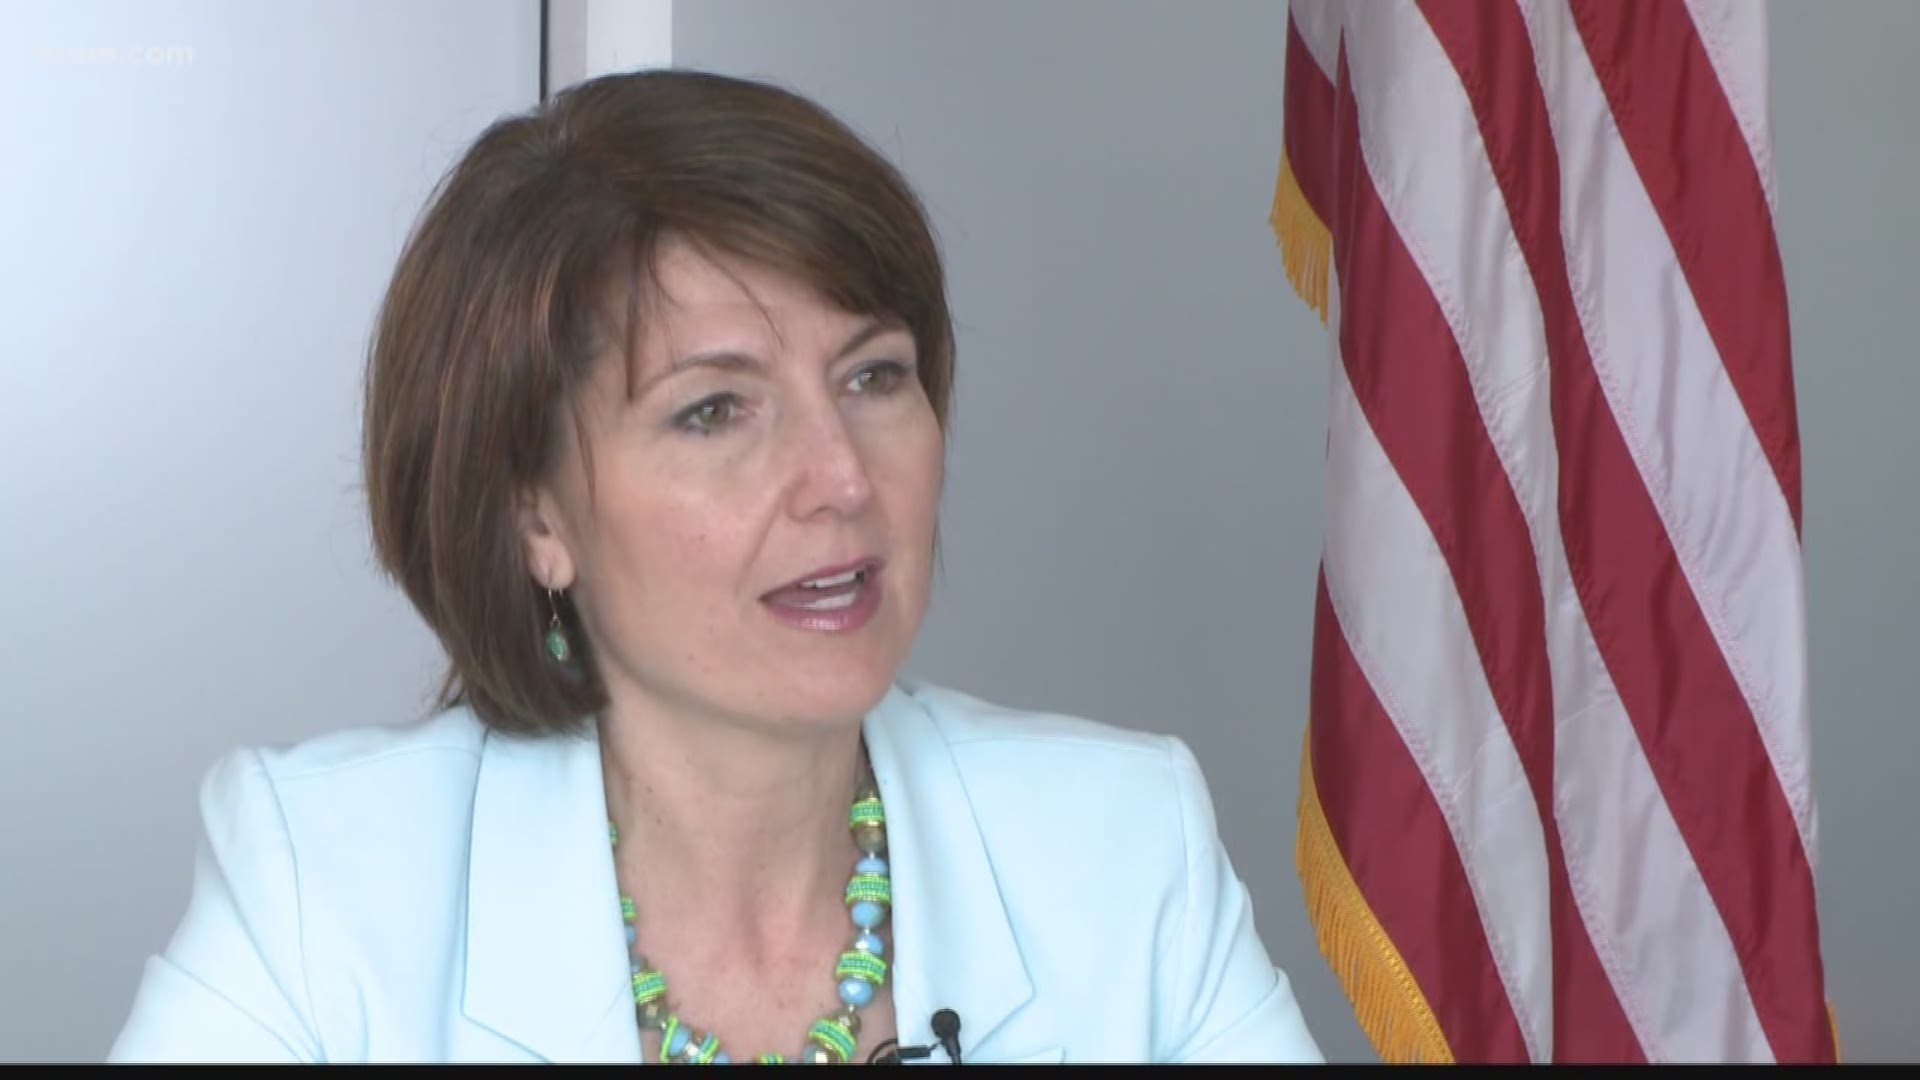 Rep. McMorris Rodgers on health care, pre-existing conditions (6-15-18)